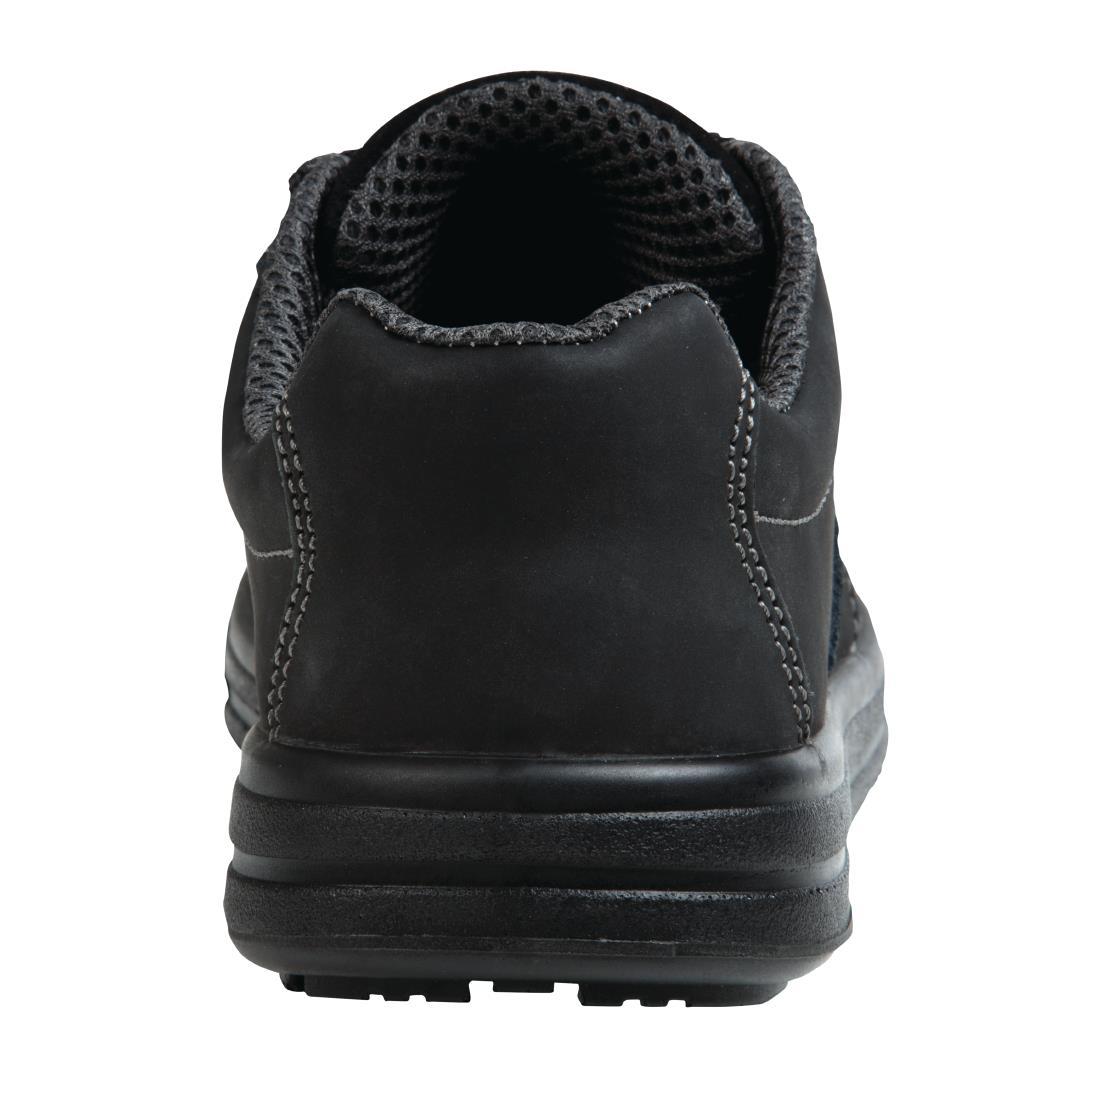 Slipbuster Safety Trainers Black 45 - BB420-45  - 4